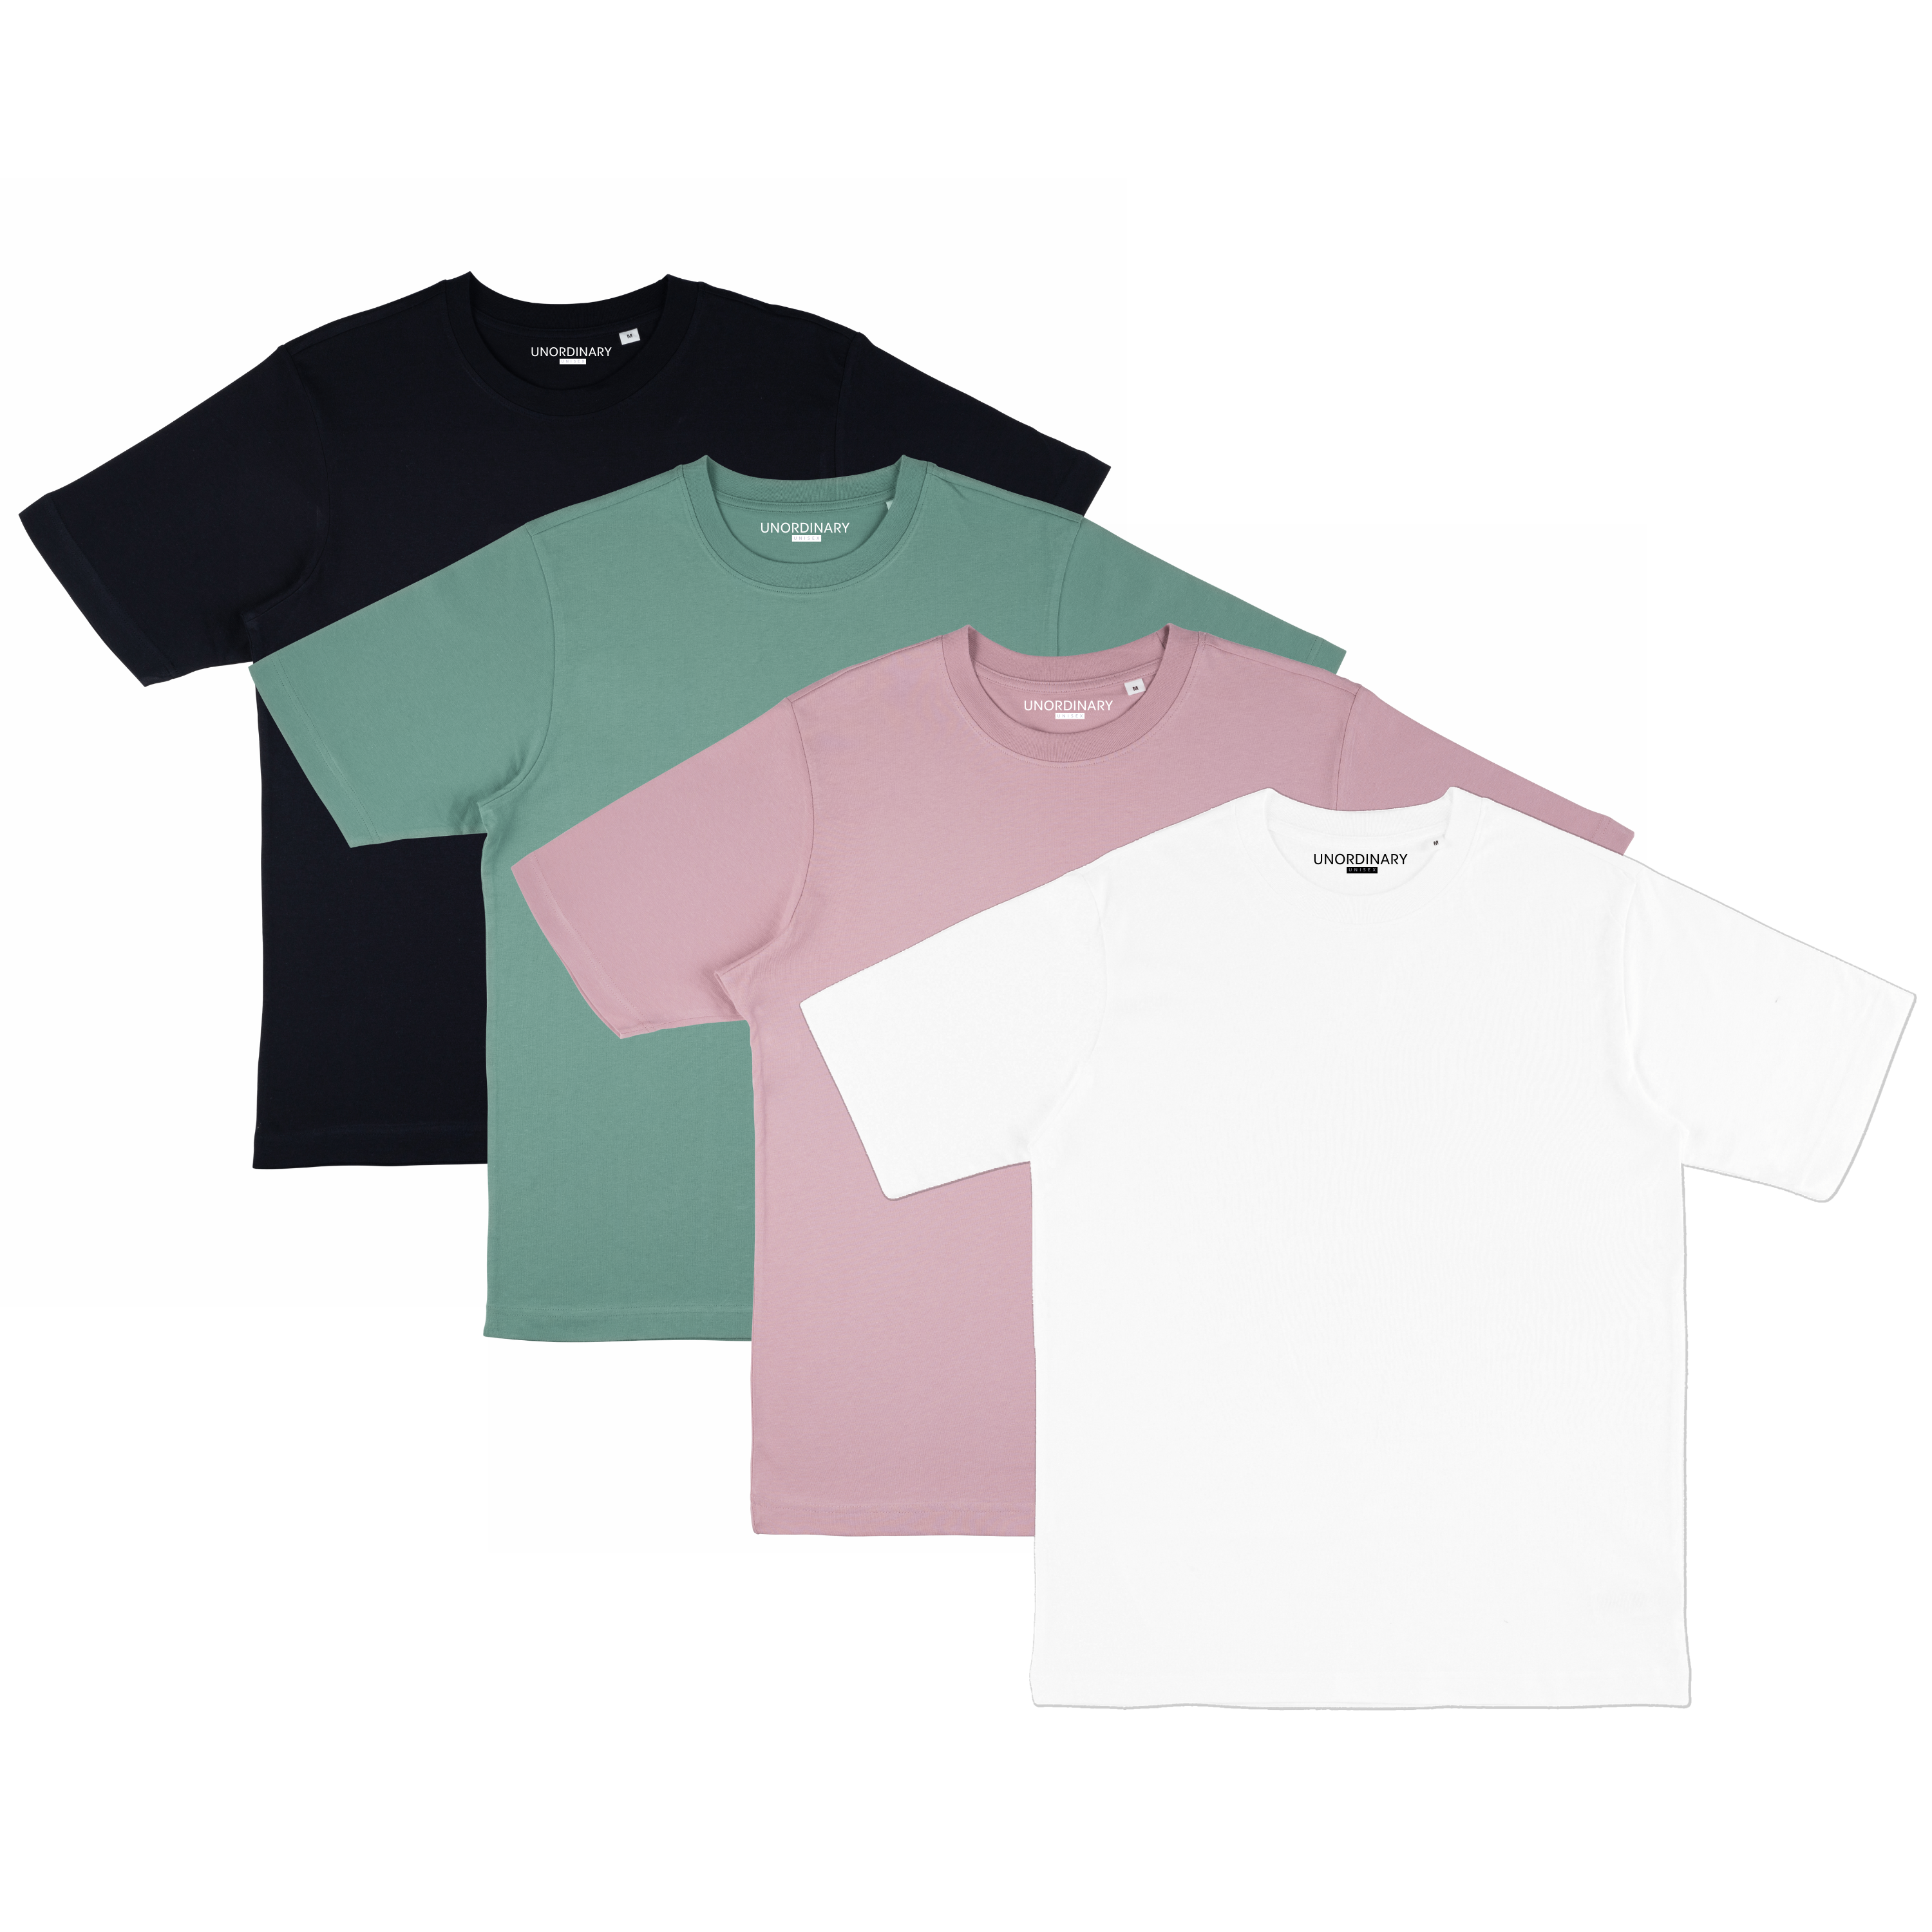 4 Pack of Oversized T-shirts